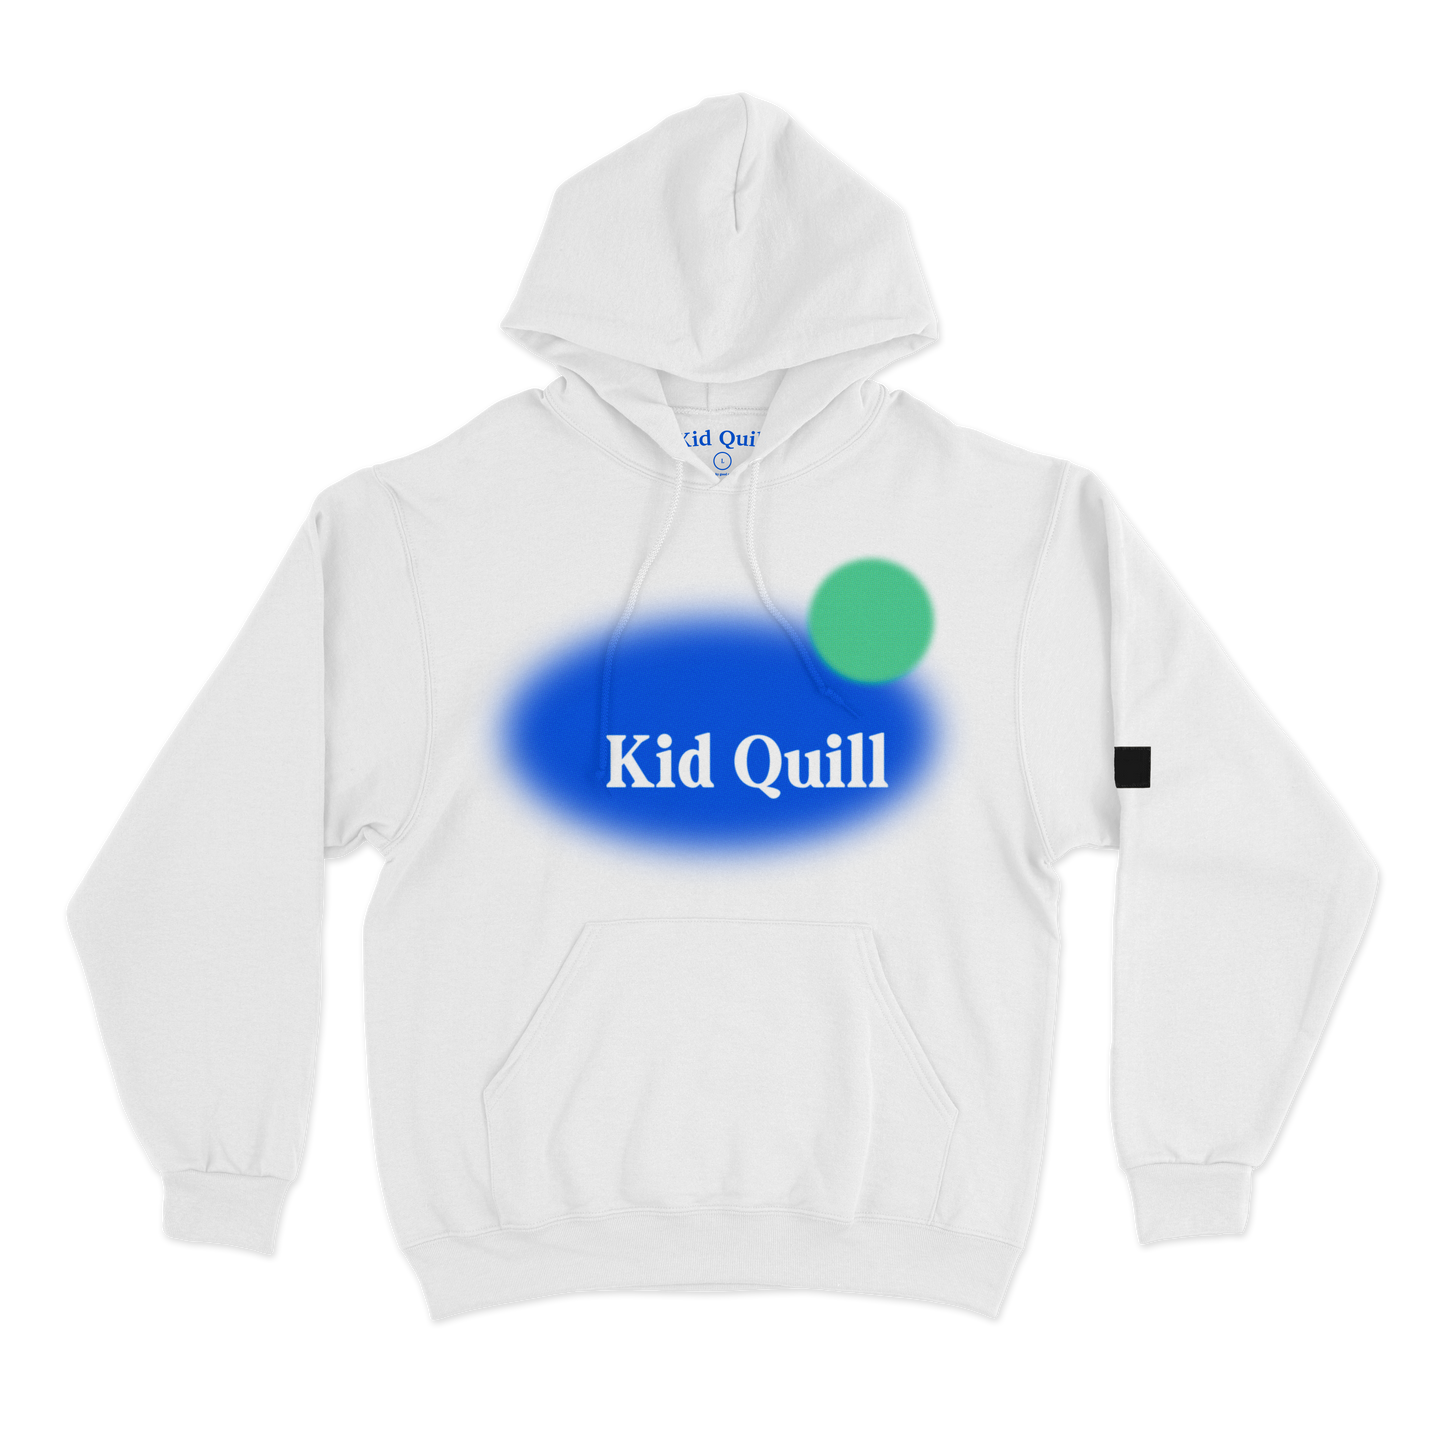 Self-Titled Kid Quill Hoodie